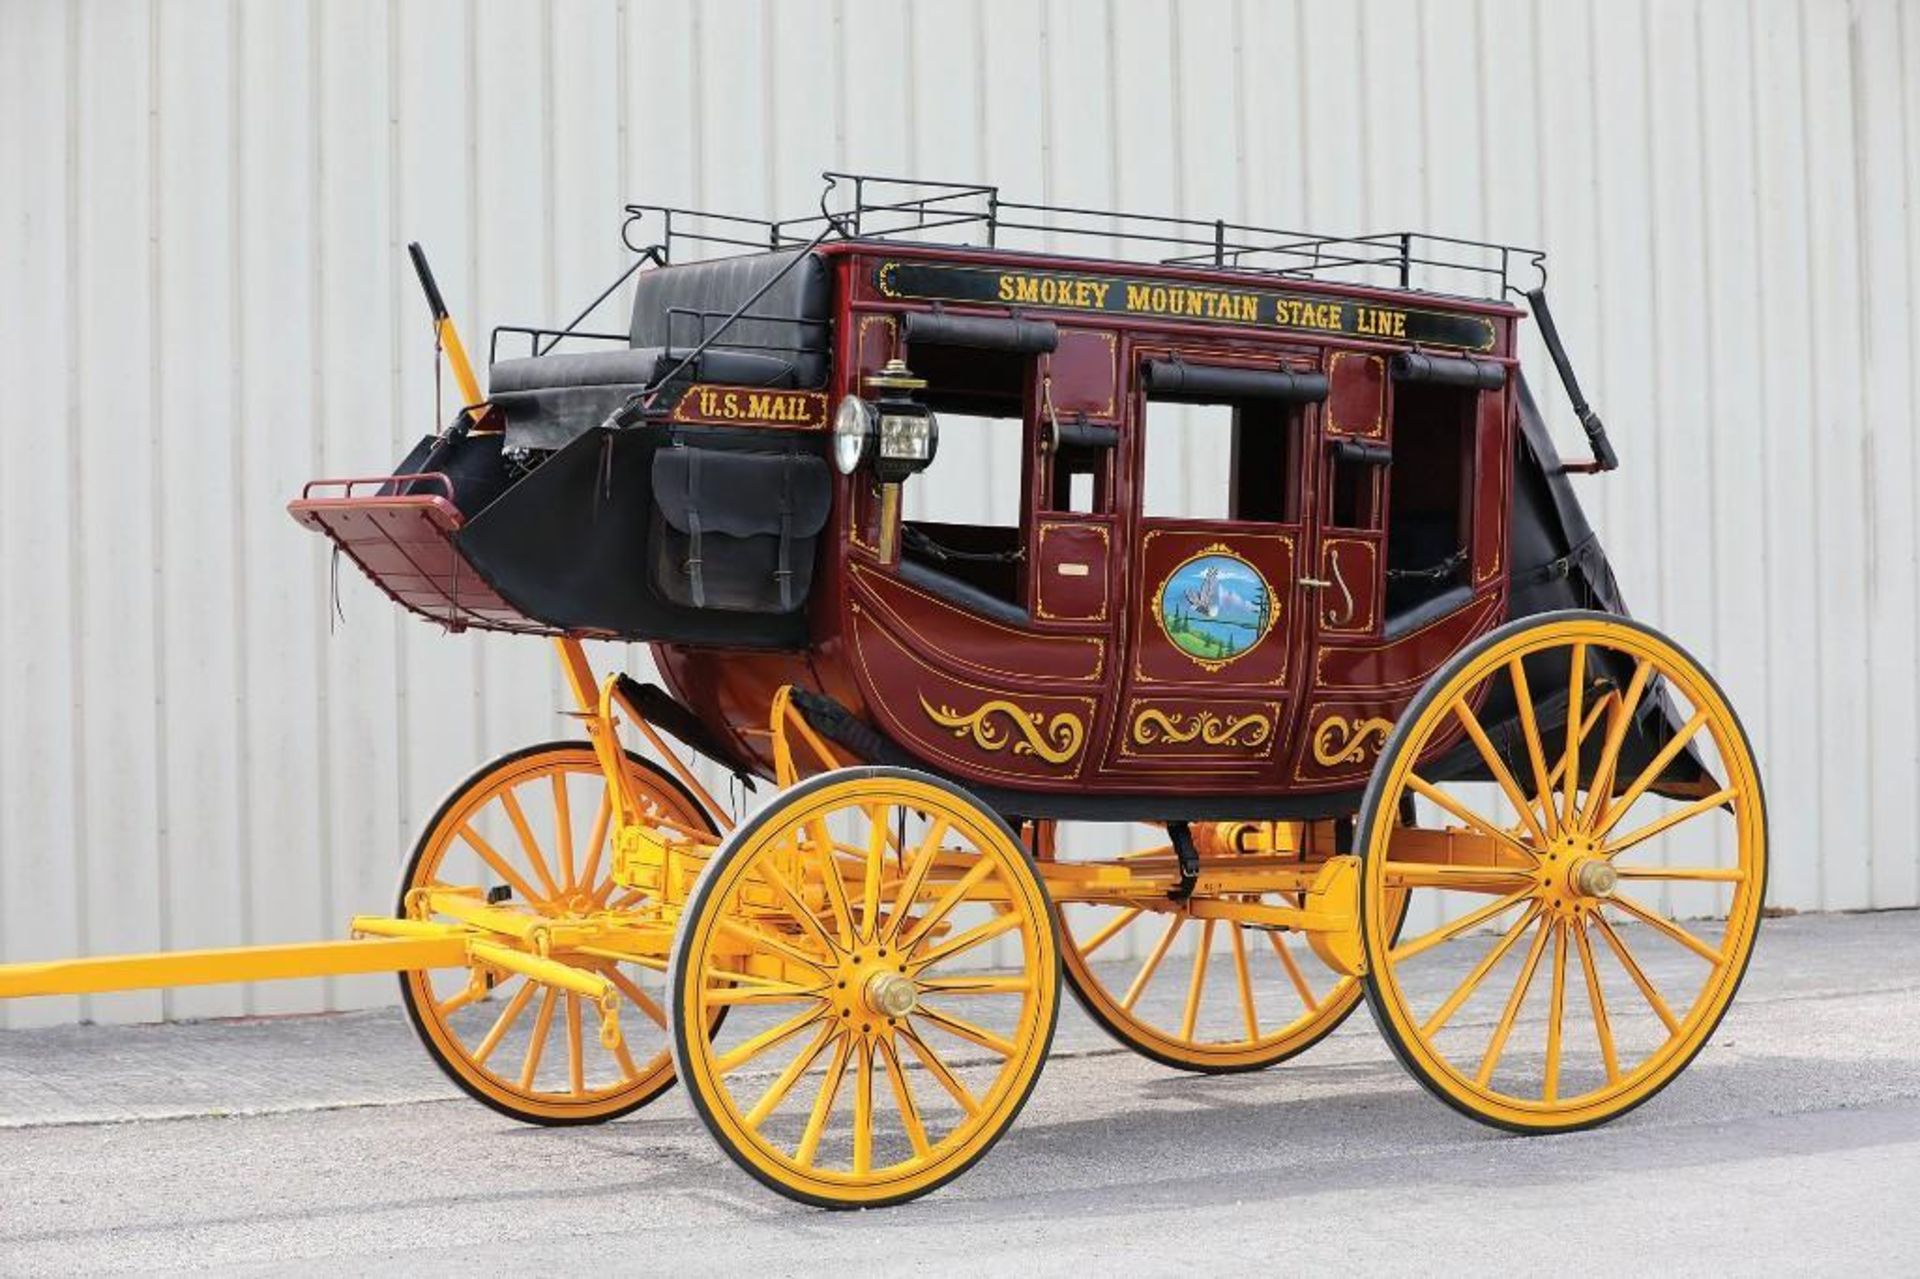 LATHAM Stagecoach, Built in Fortuna, Missouri in 2001, Mint Condition, Hooked Twice for Parades - Image 2 of 4